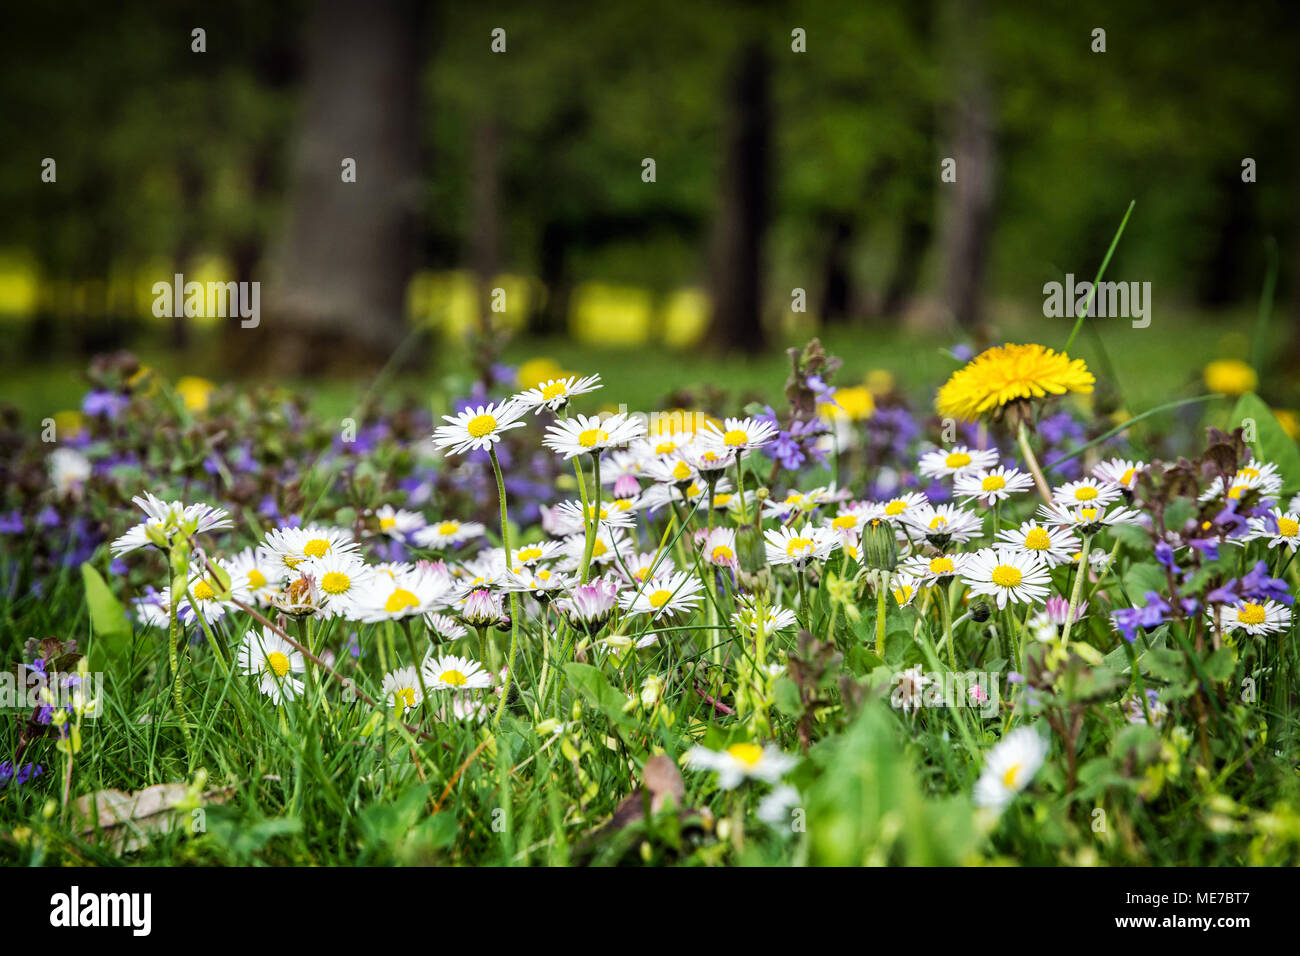 Ox-eye daisies and yellow dandelions in the spring meadow. Seasonal natural scene. Stock Photo